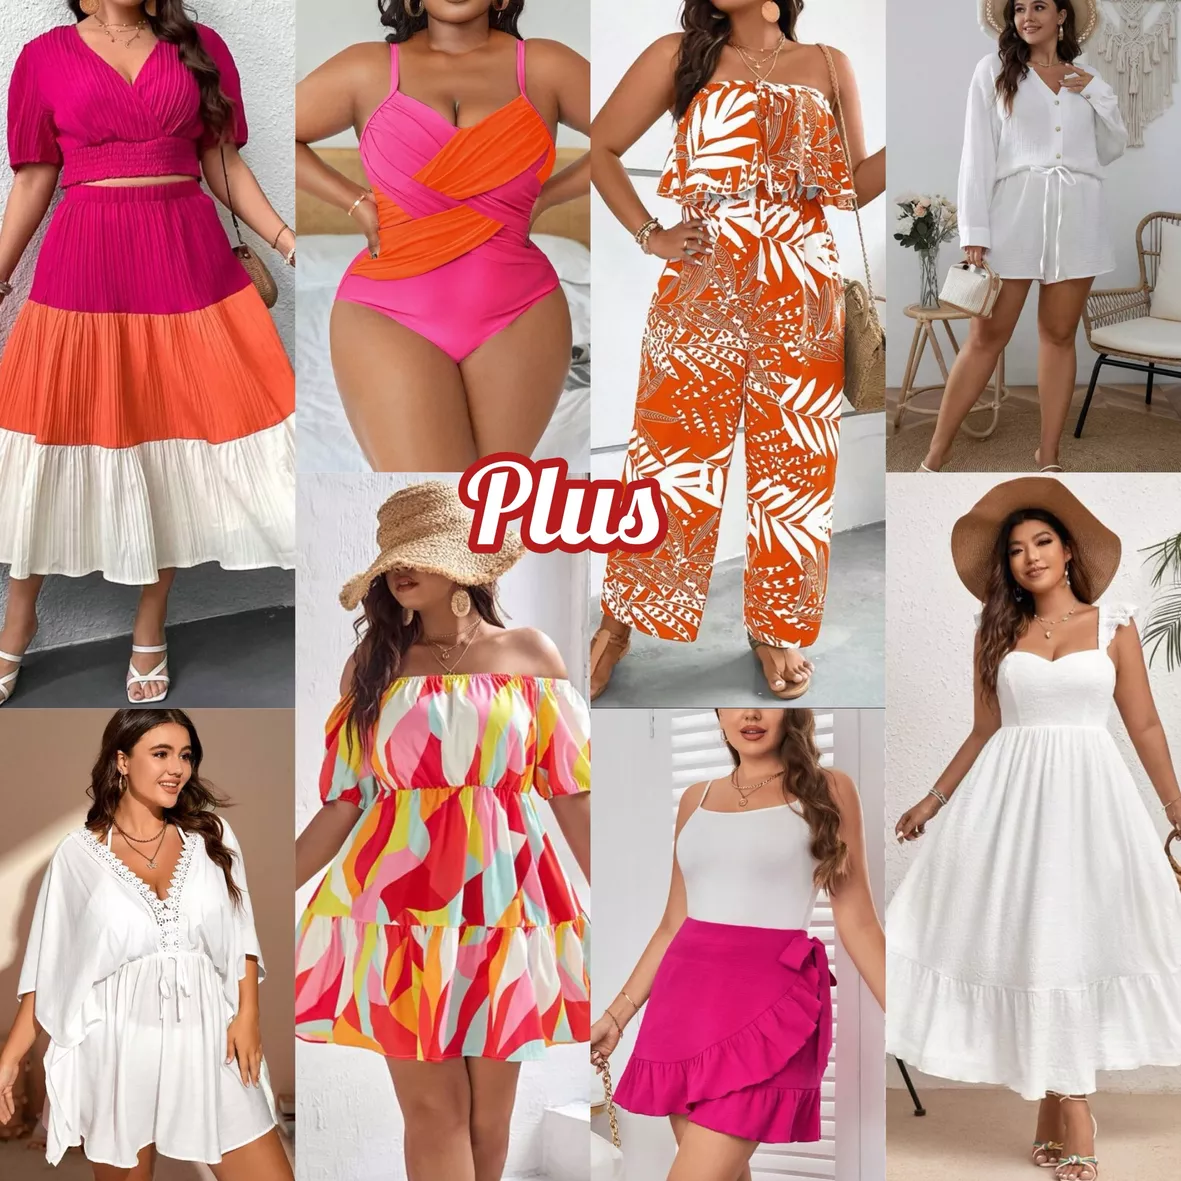 What should I wear for a plus size beach vacation?